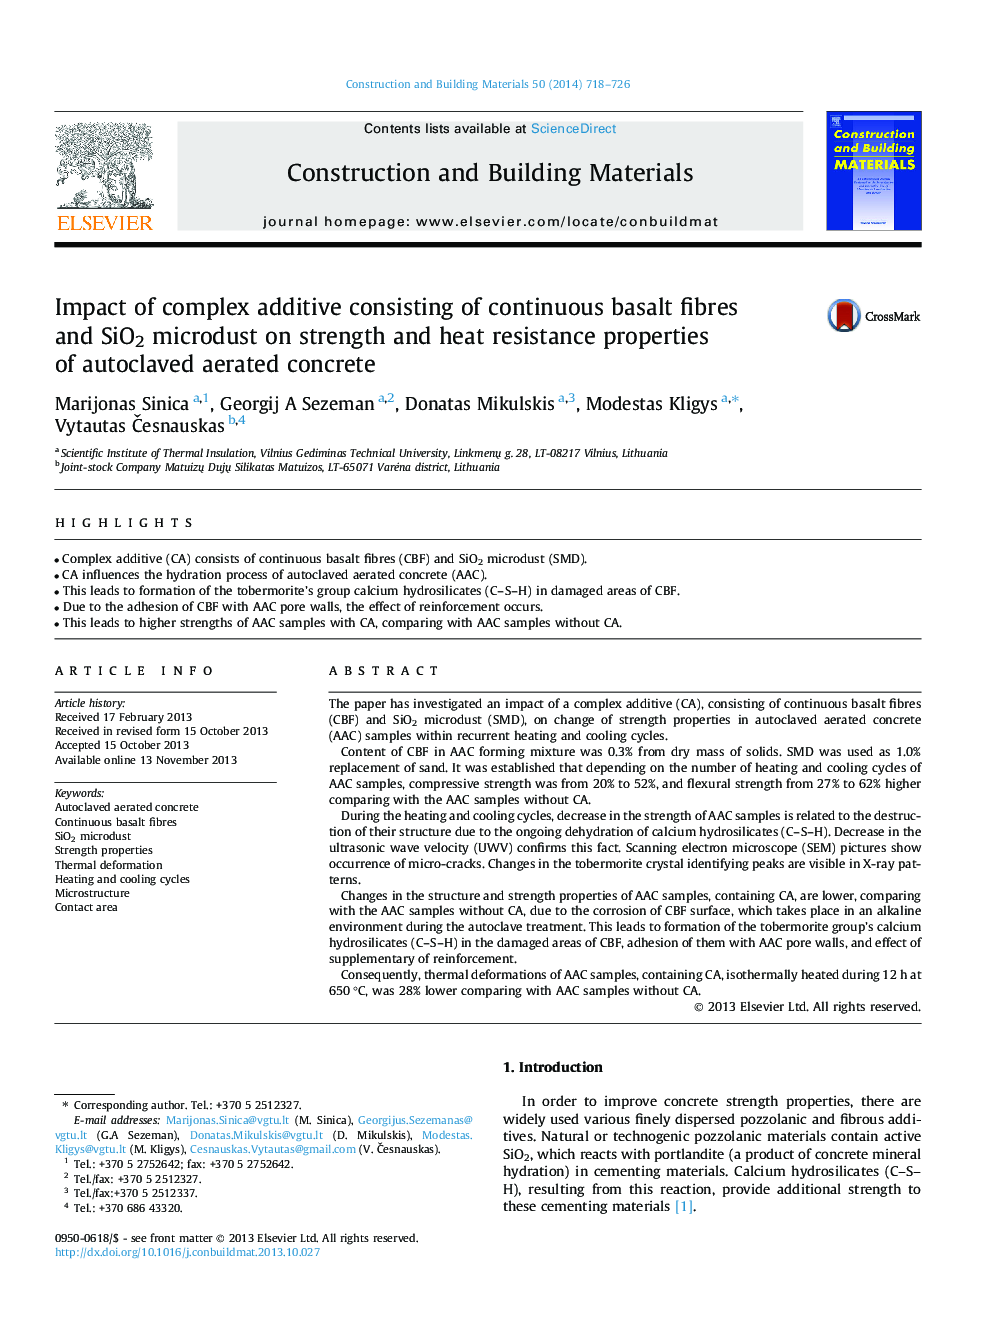 Impact of complex additive consisting of continuous basalt fibres and SiO2 microdust on strength and heat resistance properties of autoclaved aerated concrete